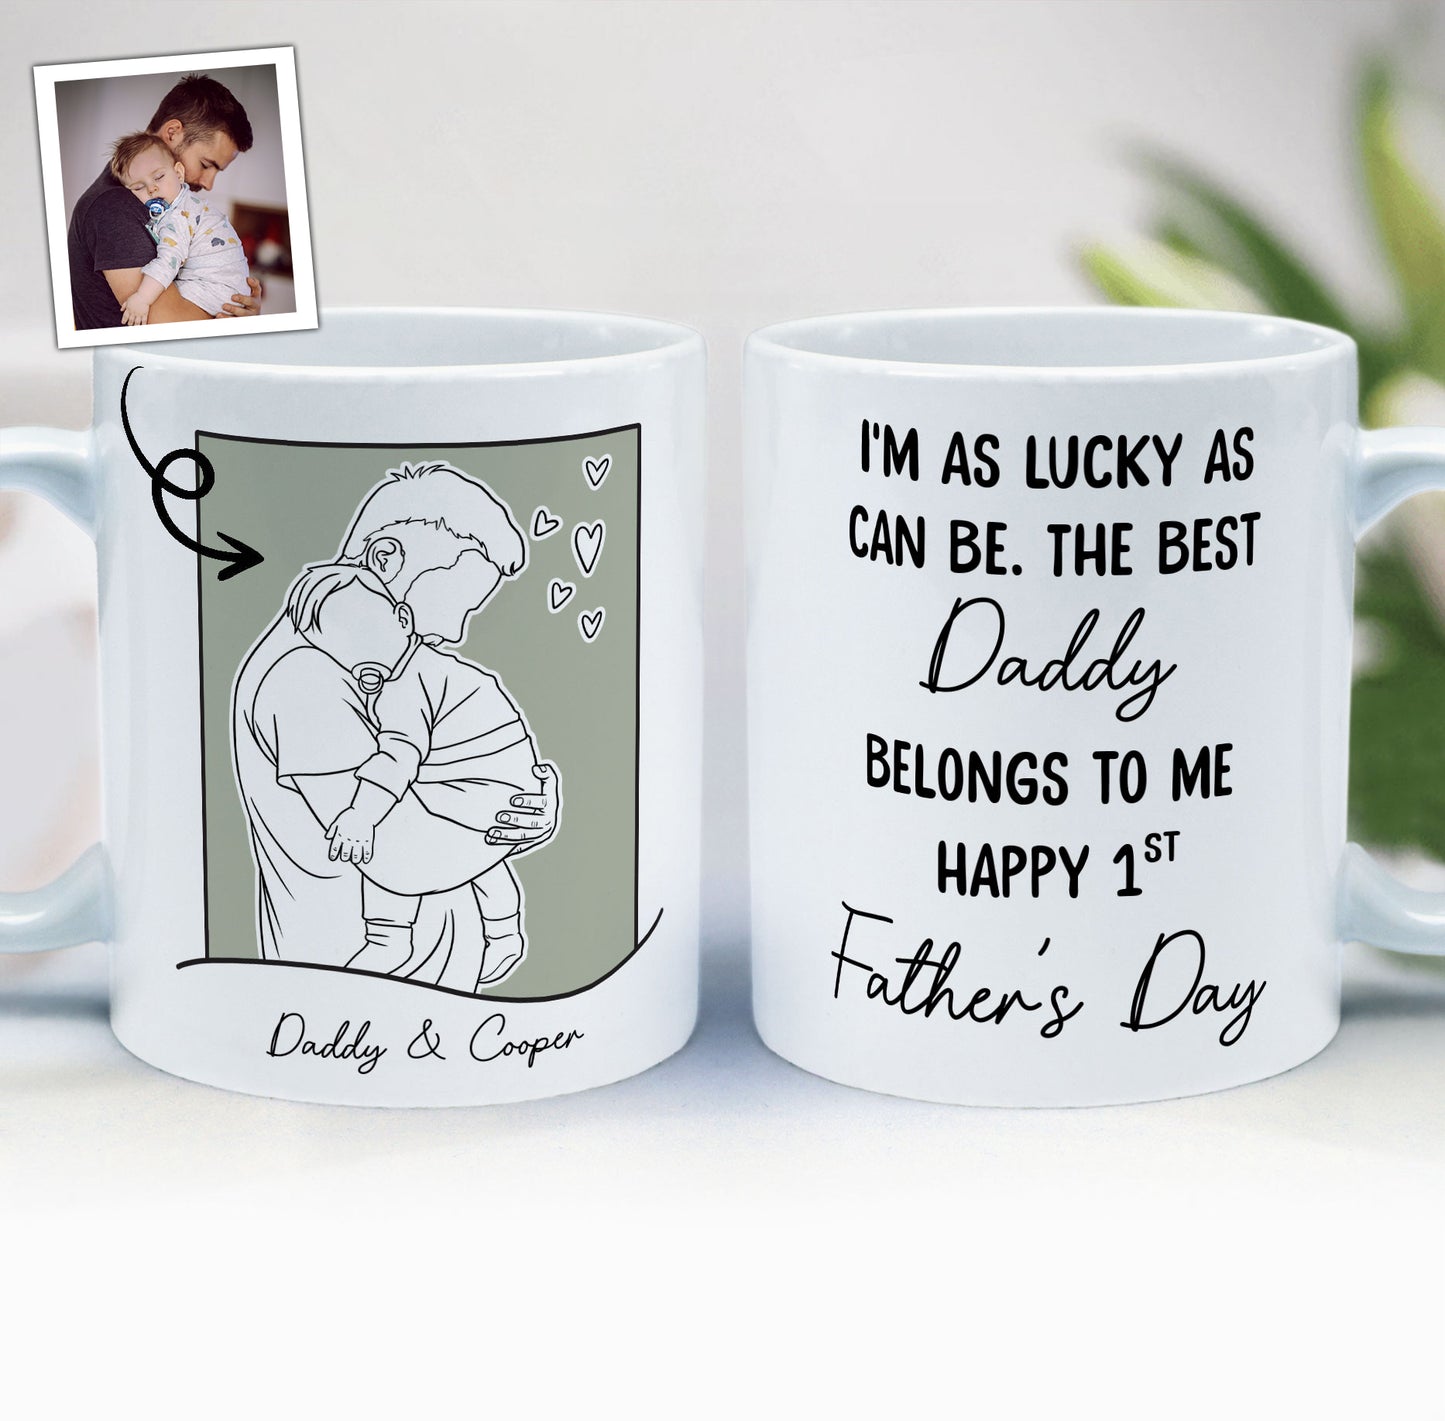 The Best Daddy Belongs To Me - Personalized Mug